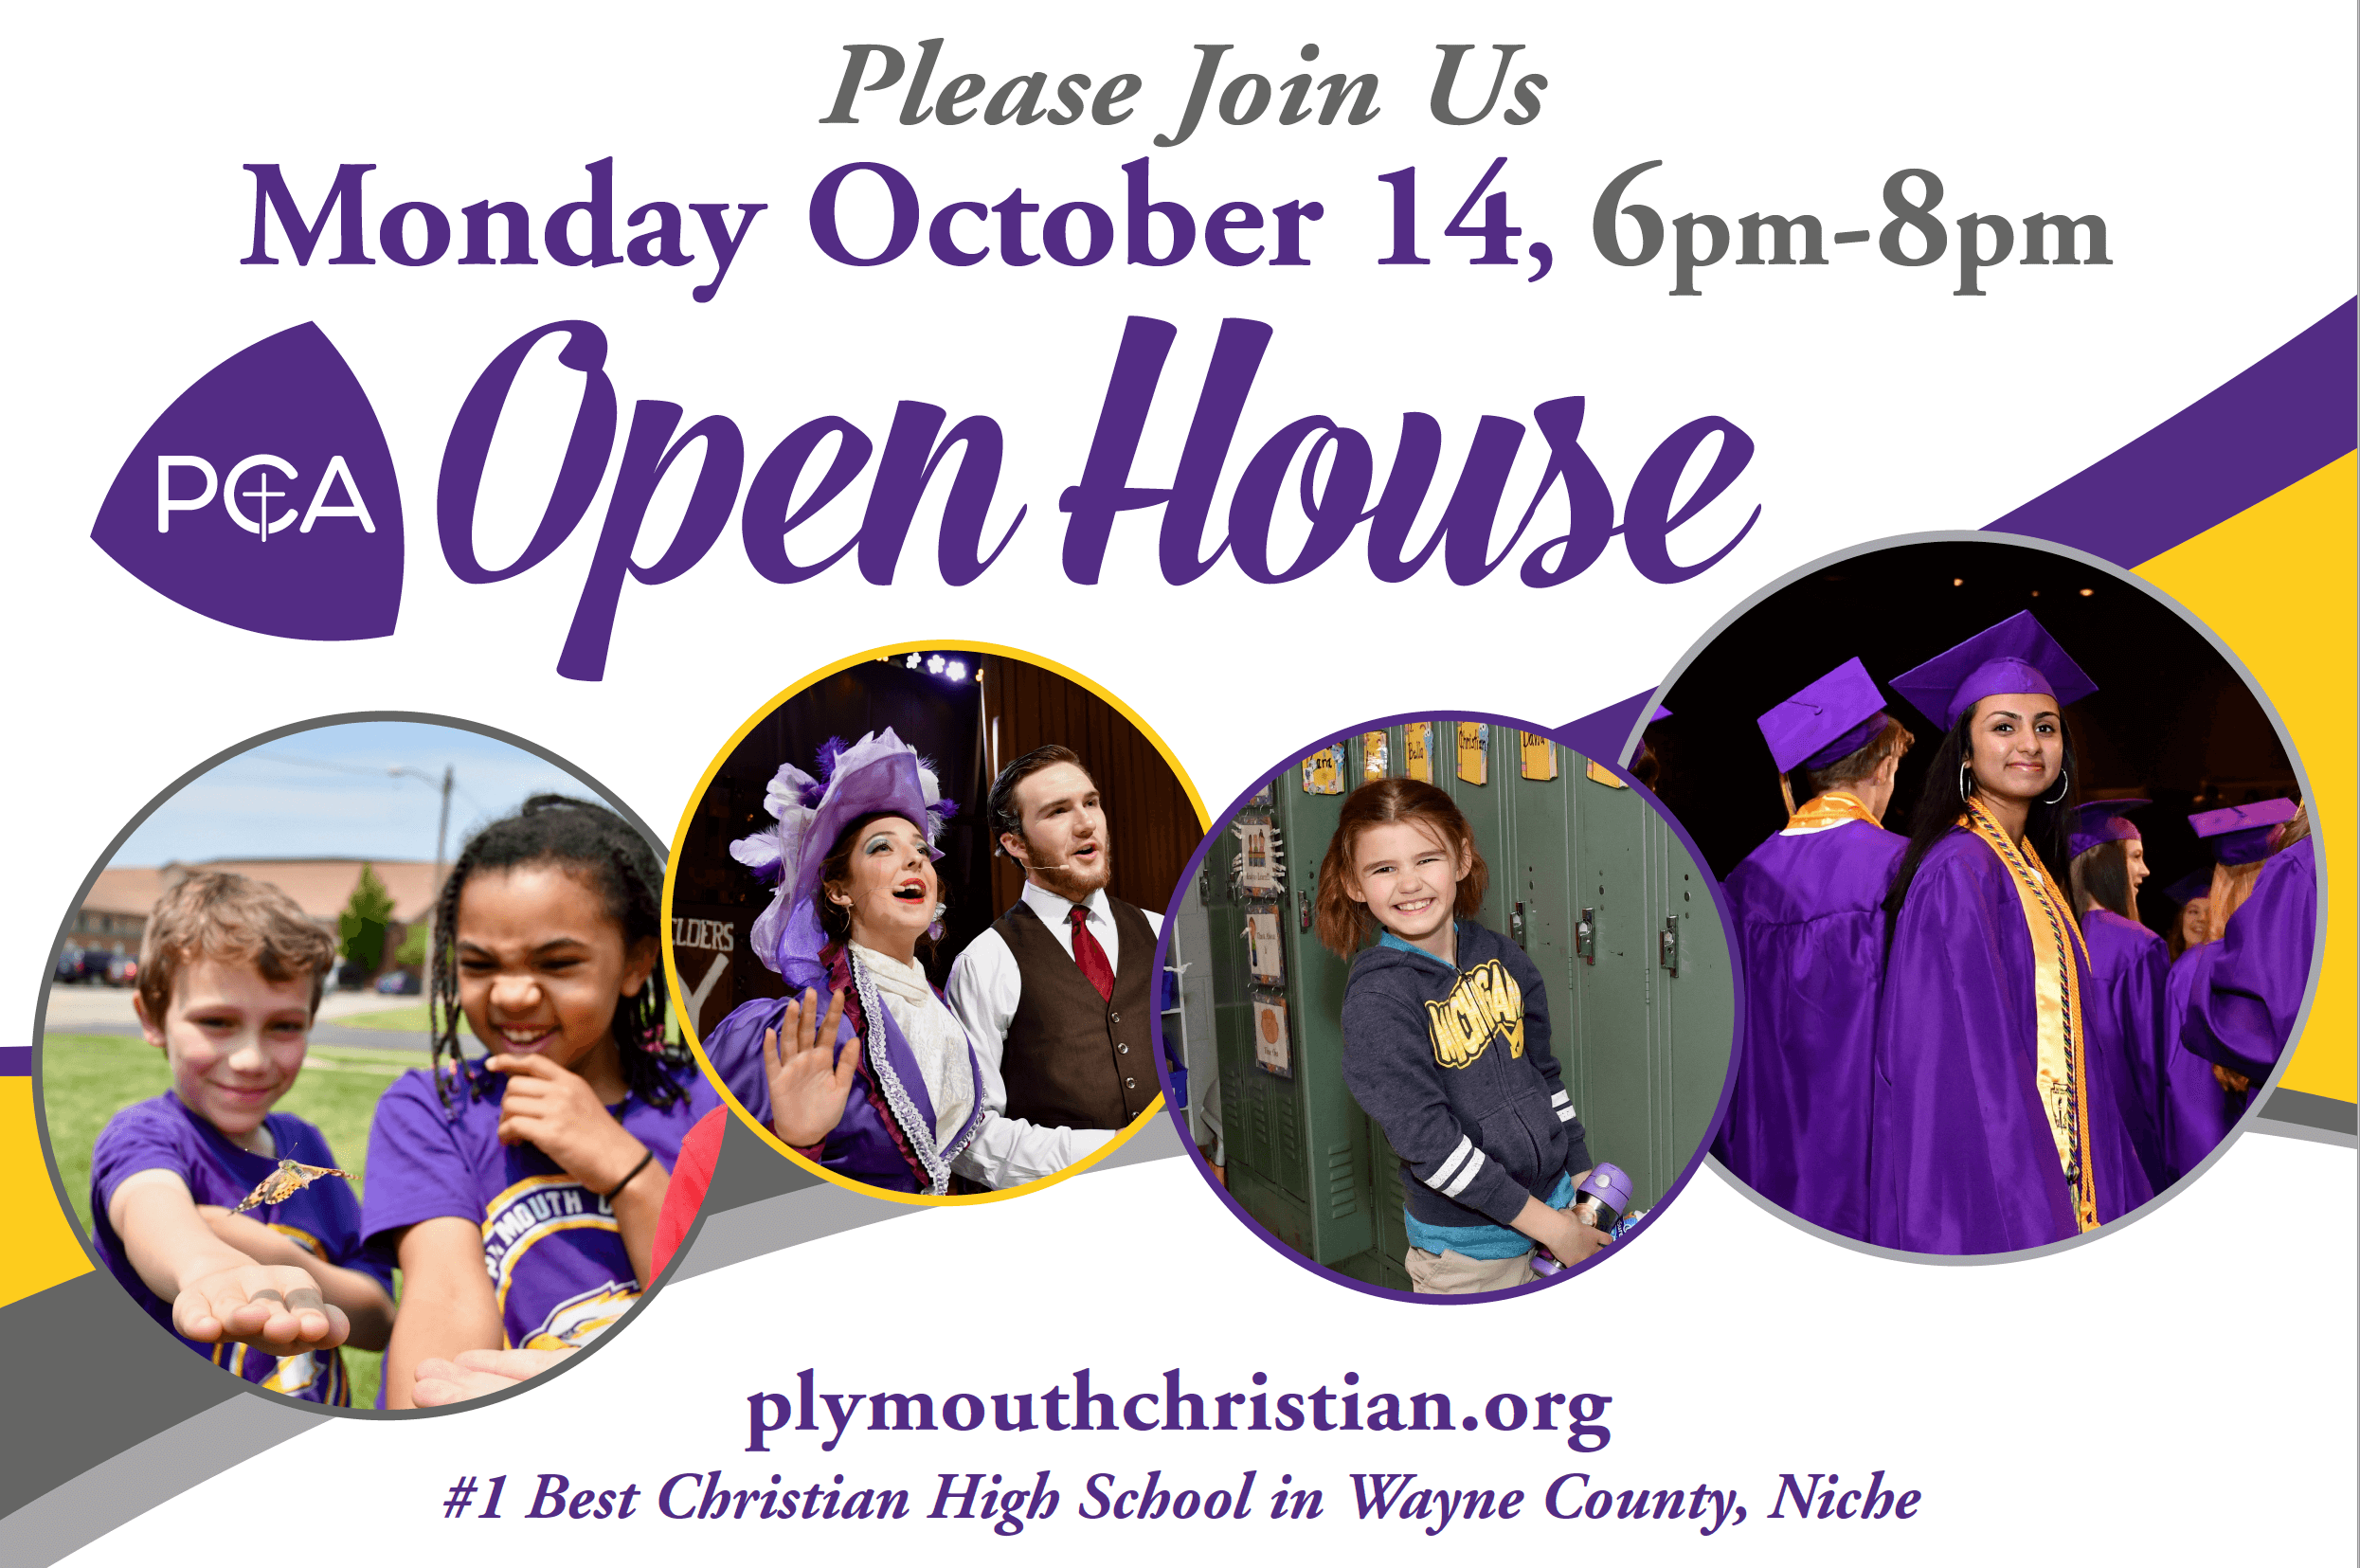 PCA Open House Fall 2019 - Plymouth Christian Academy